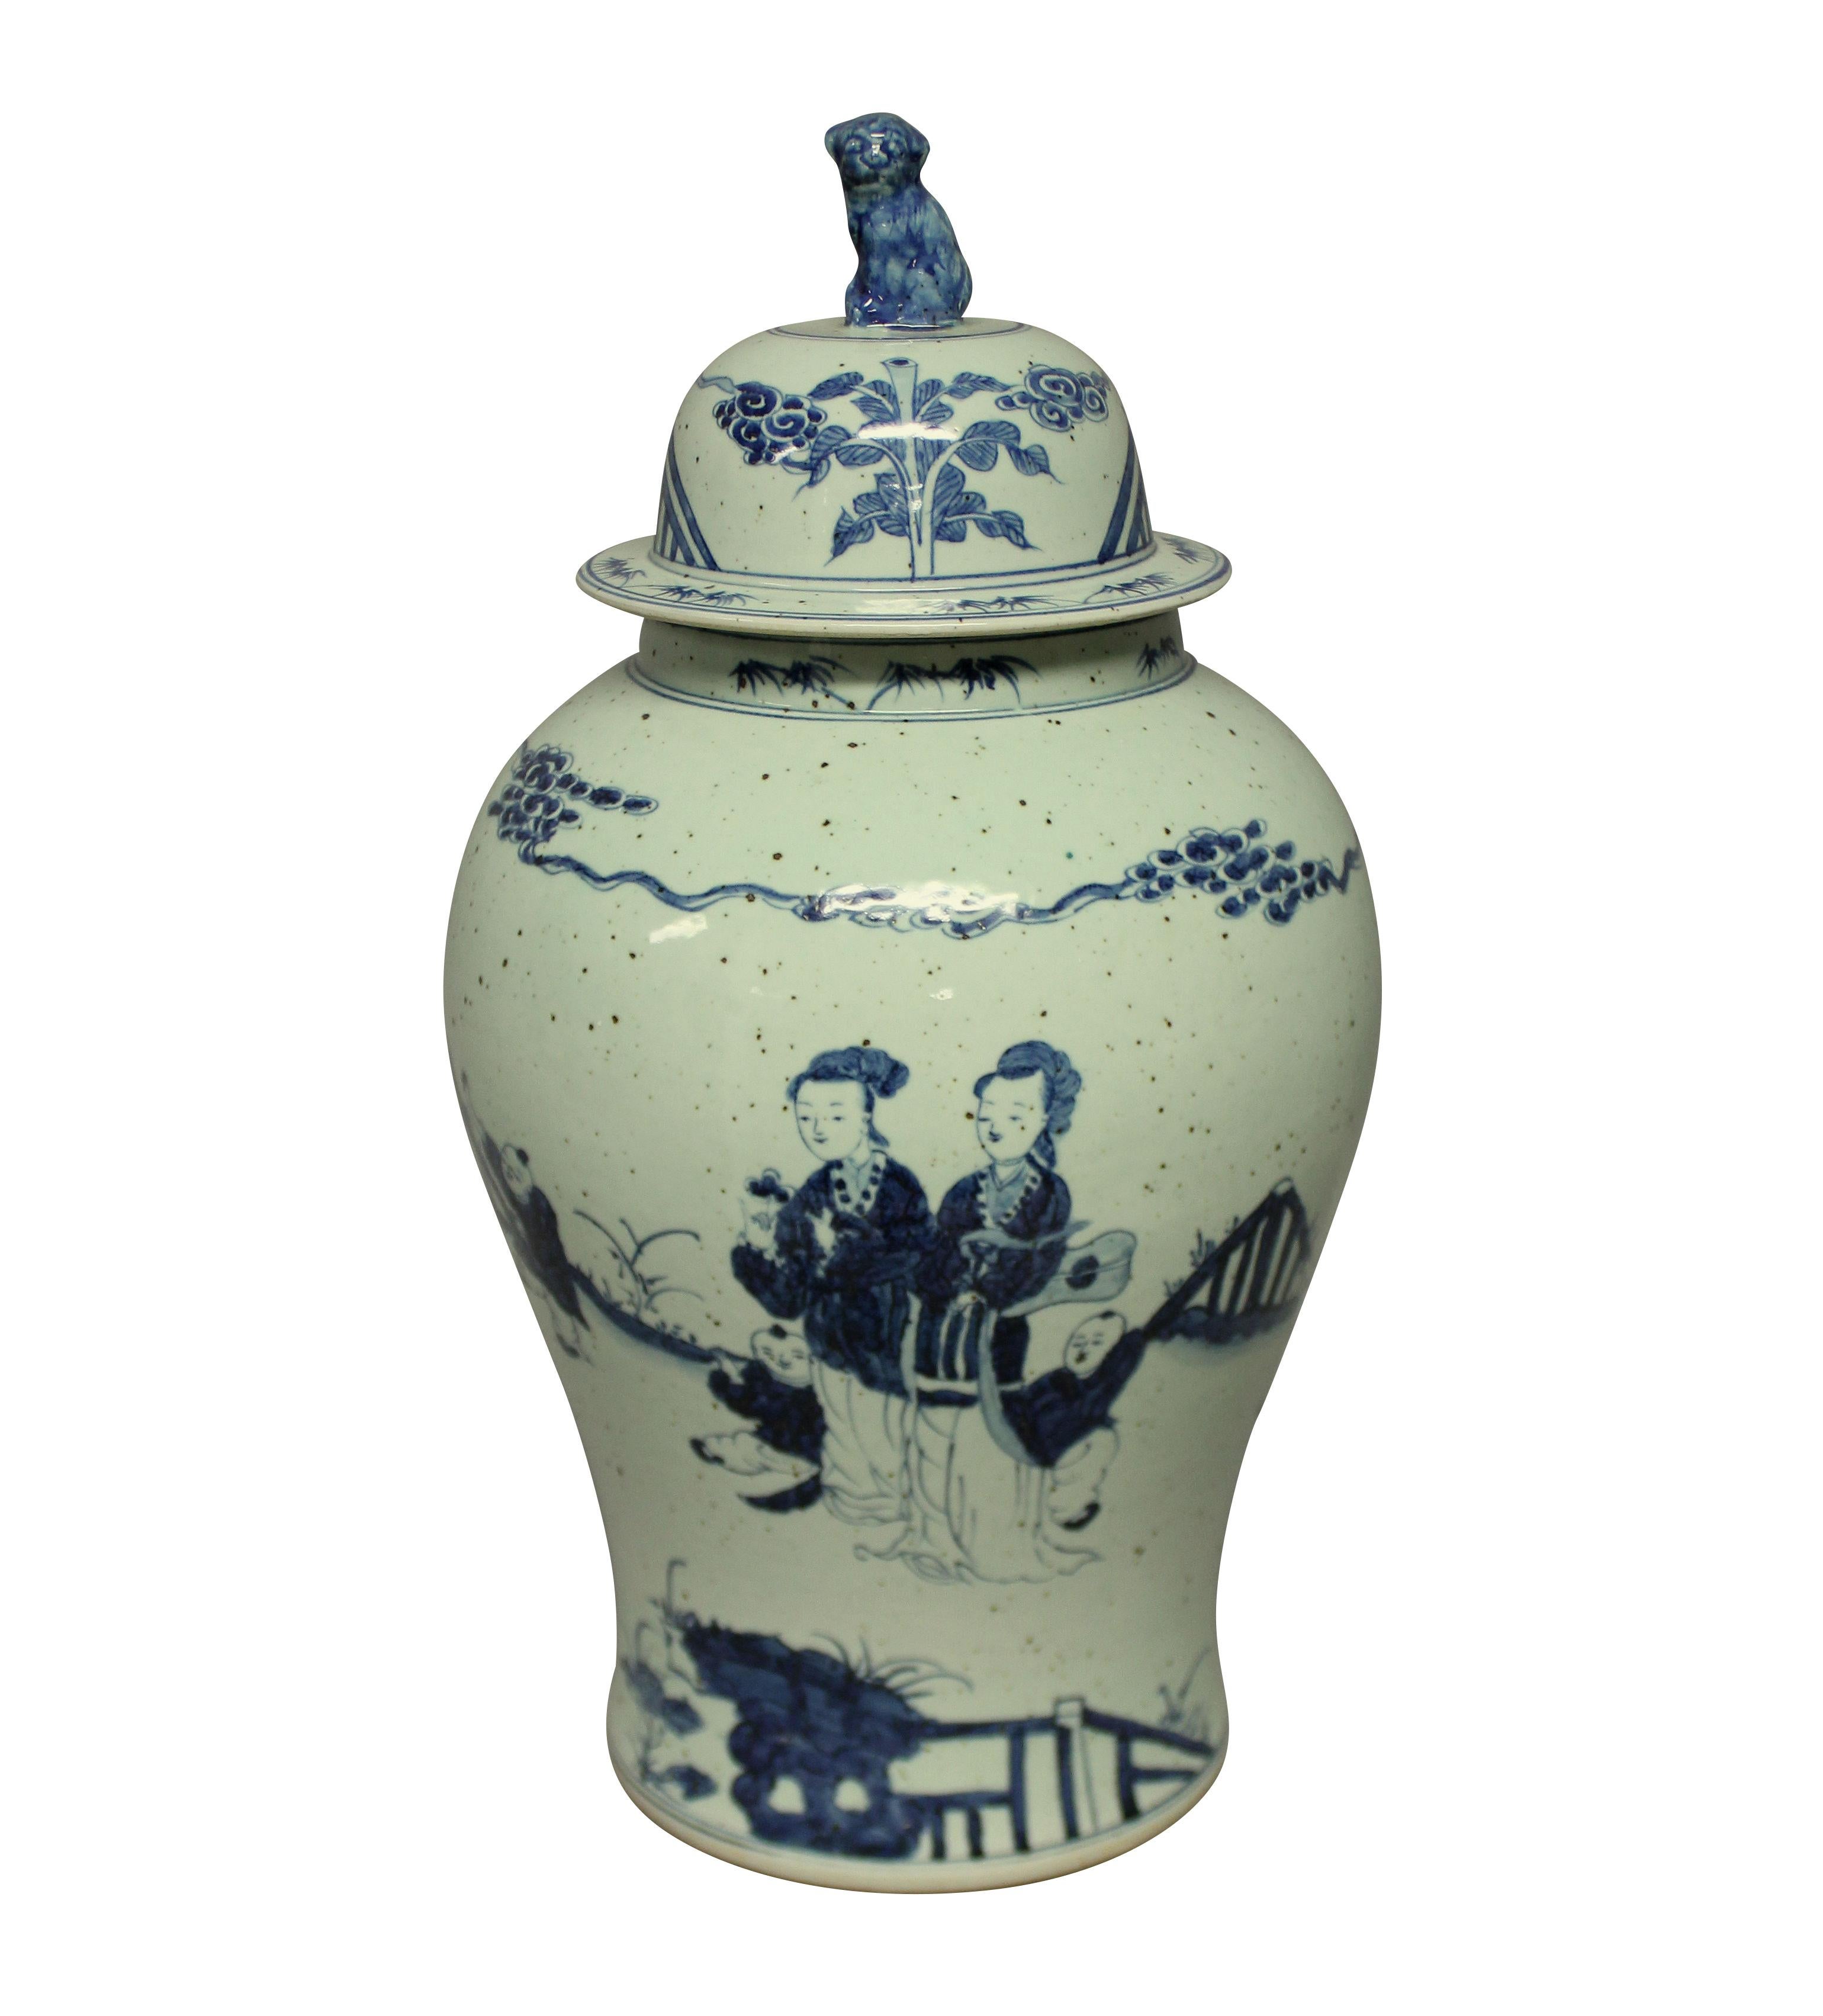 A large Chinese blue and white covered vase, with scenes on all sides. The background colour is pale duck egg.